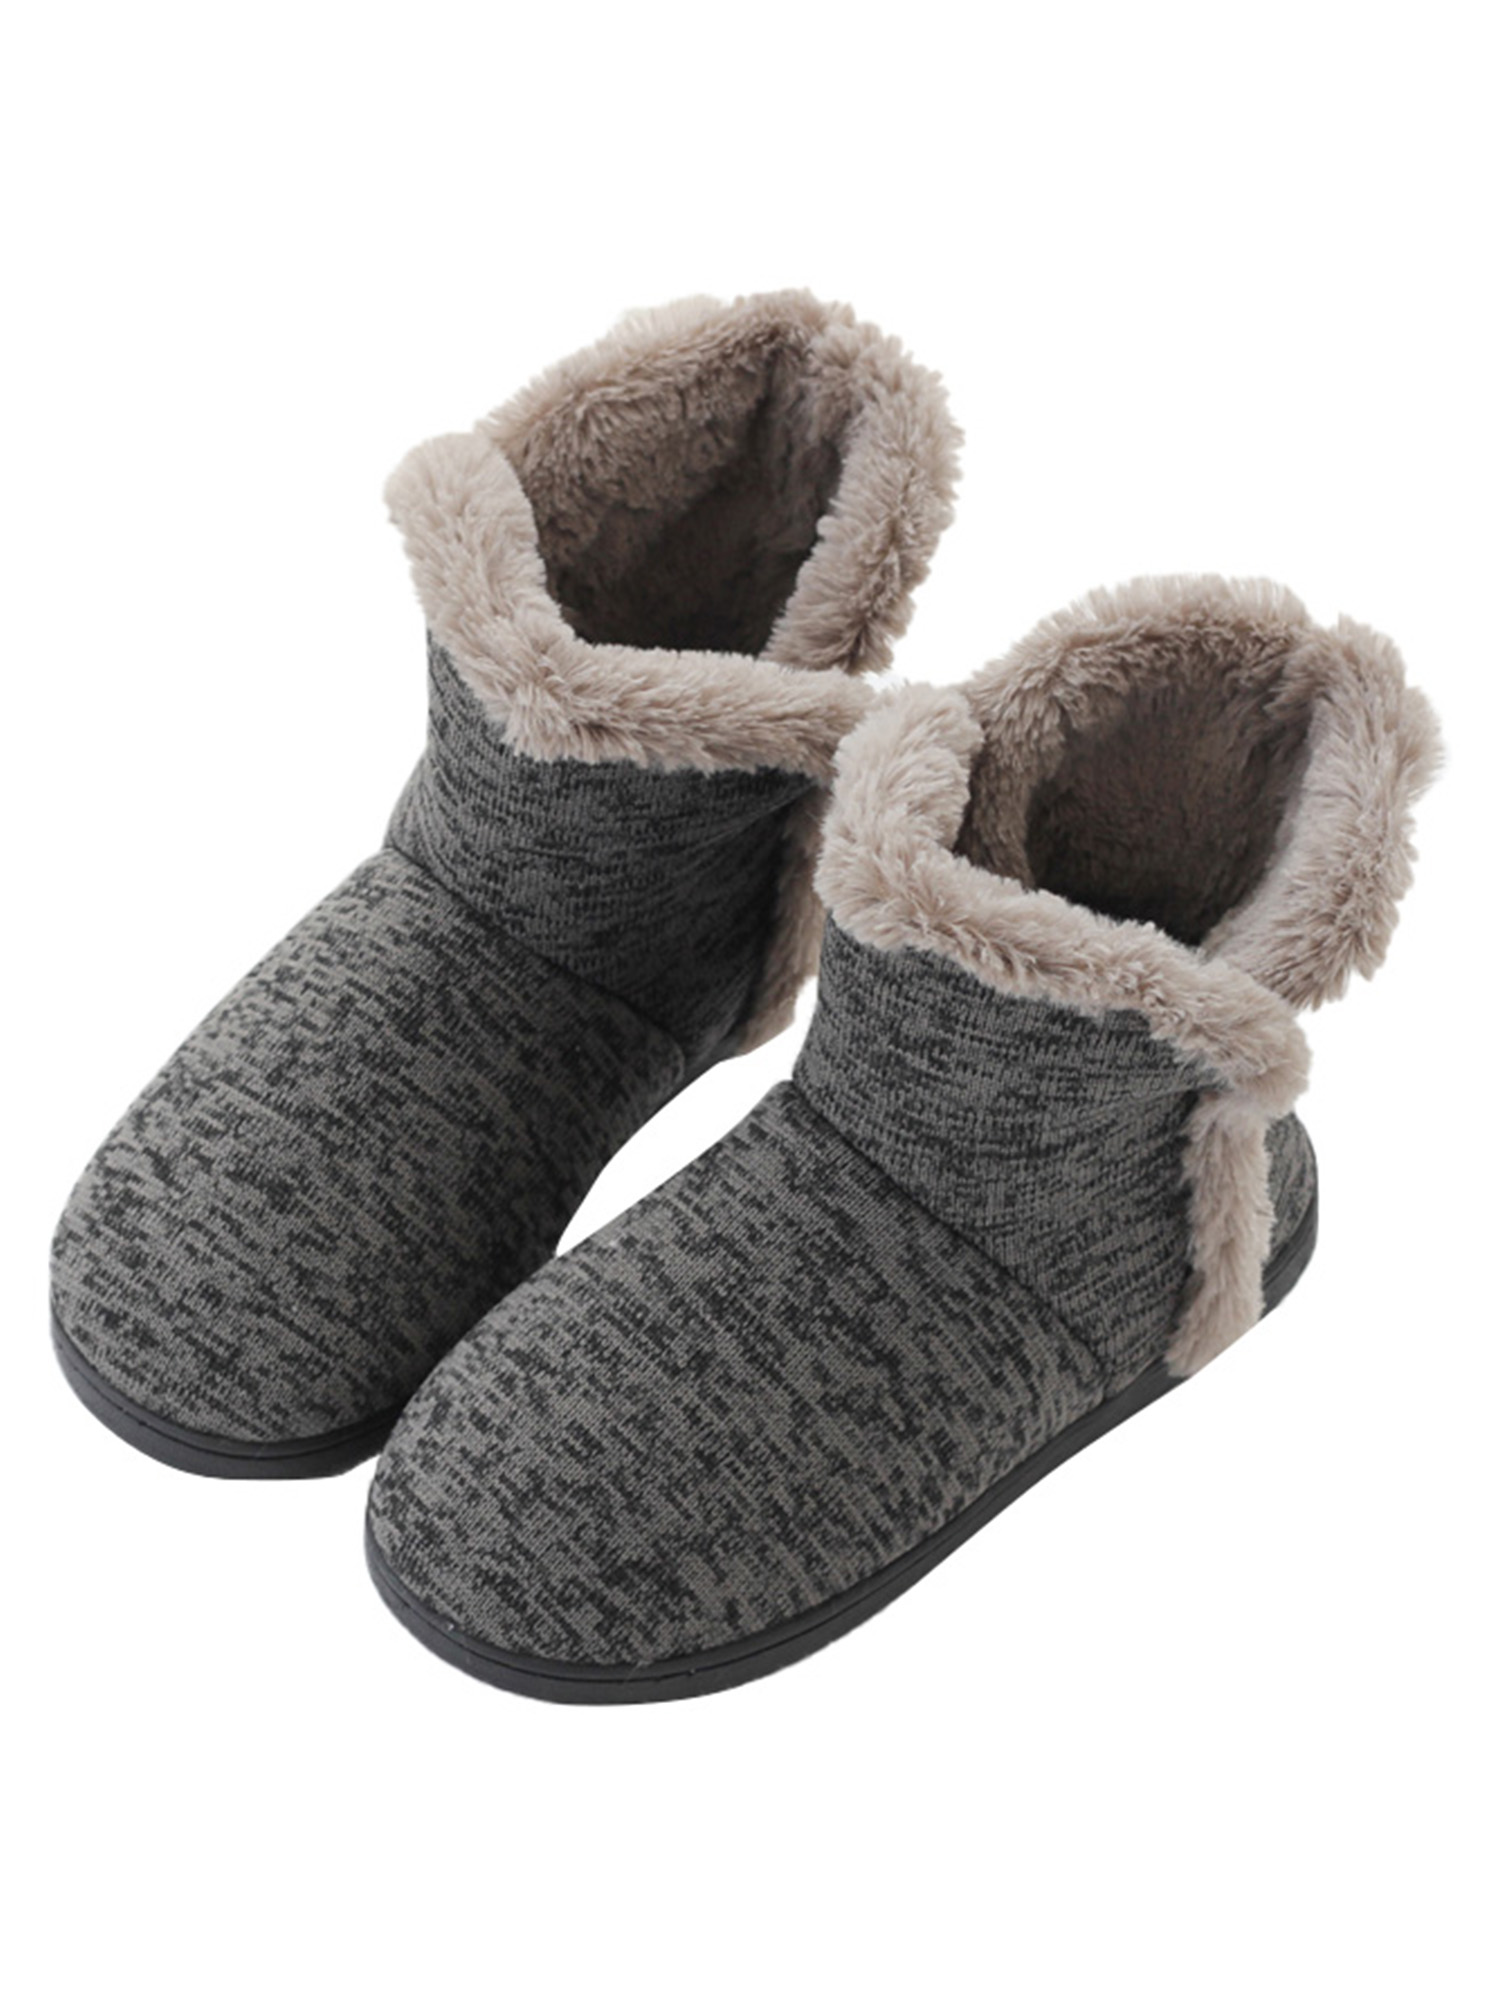 Mens Bootie Slippers Solid Plush House Shoes Winter Boots Warm Gray WAV1 - image 4 of 4